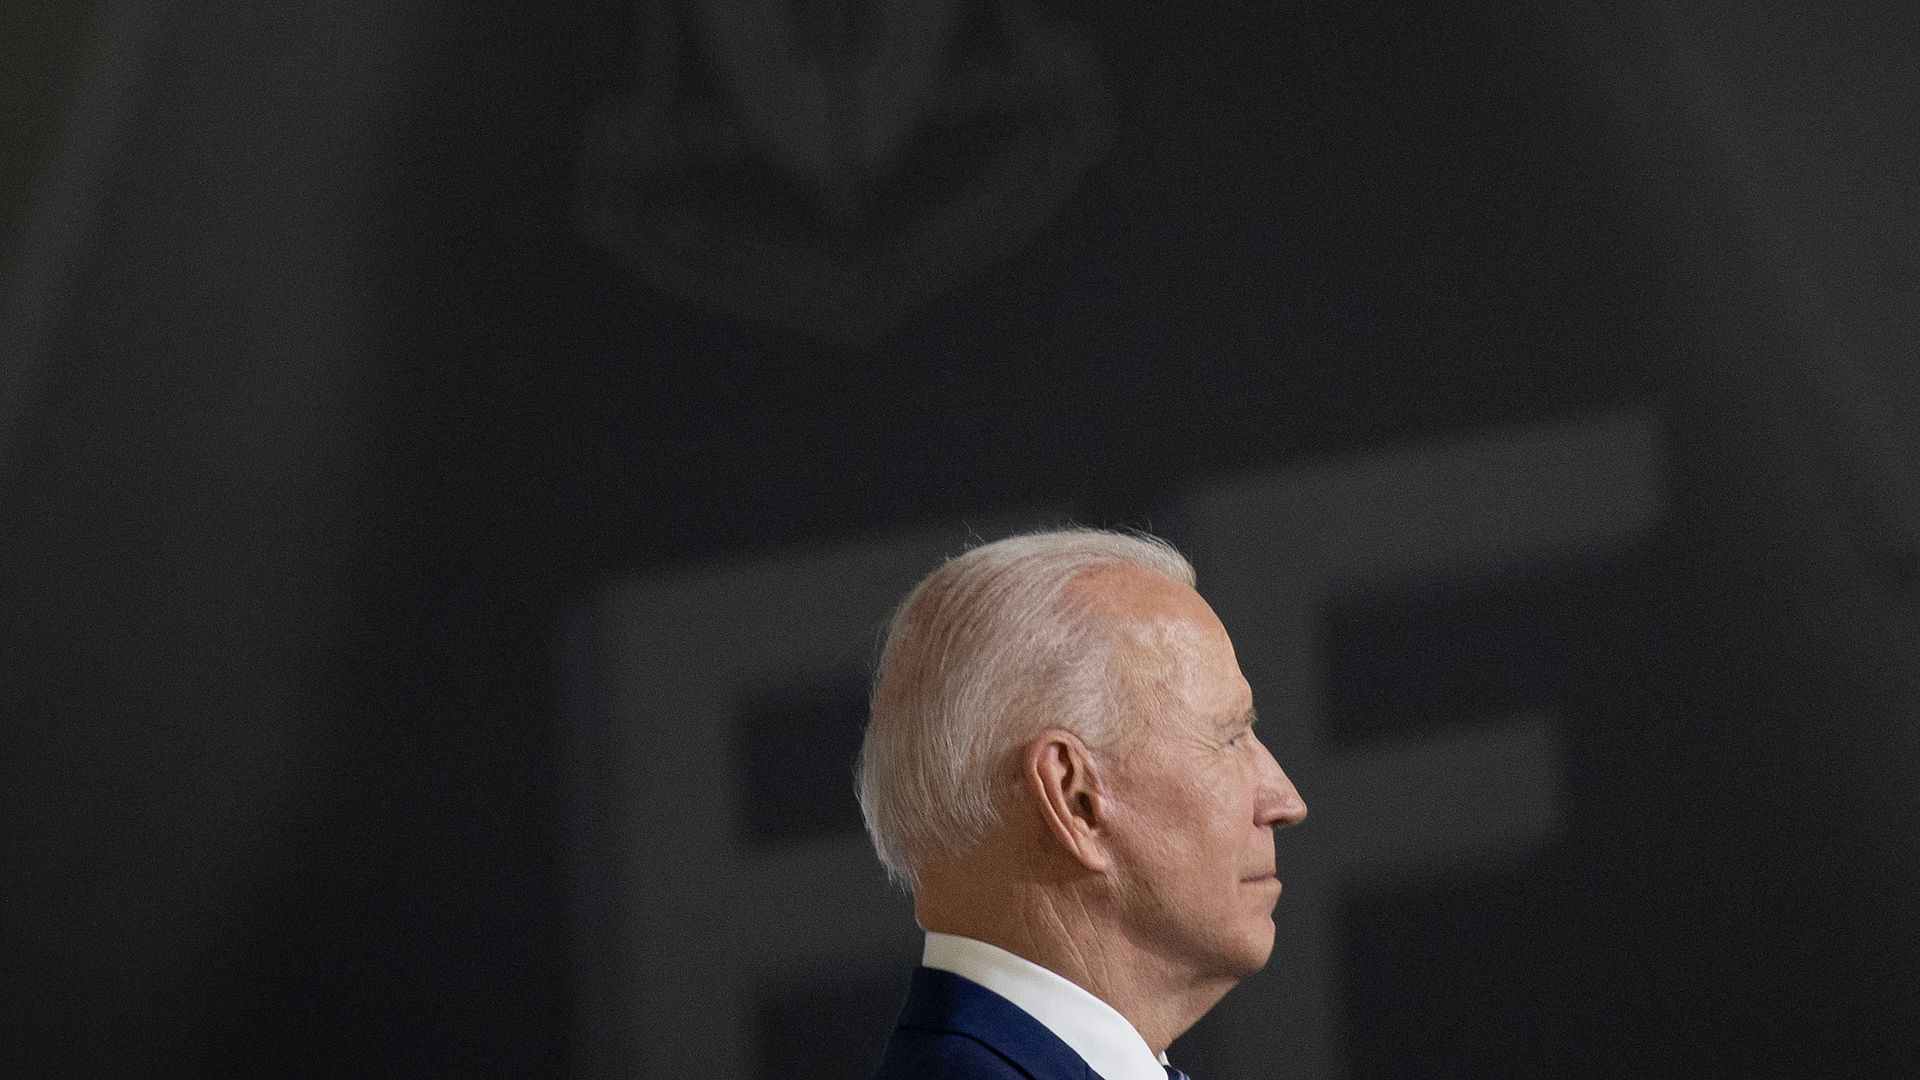 Photo of Biden's head from the side angle